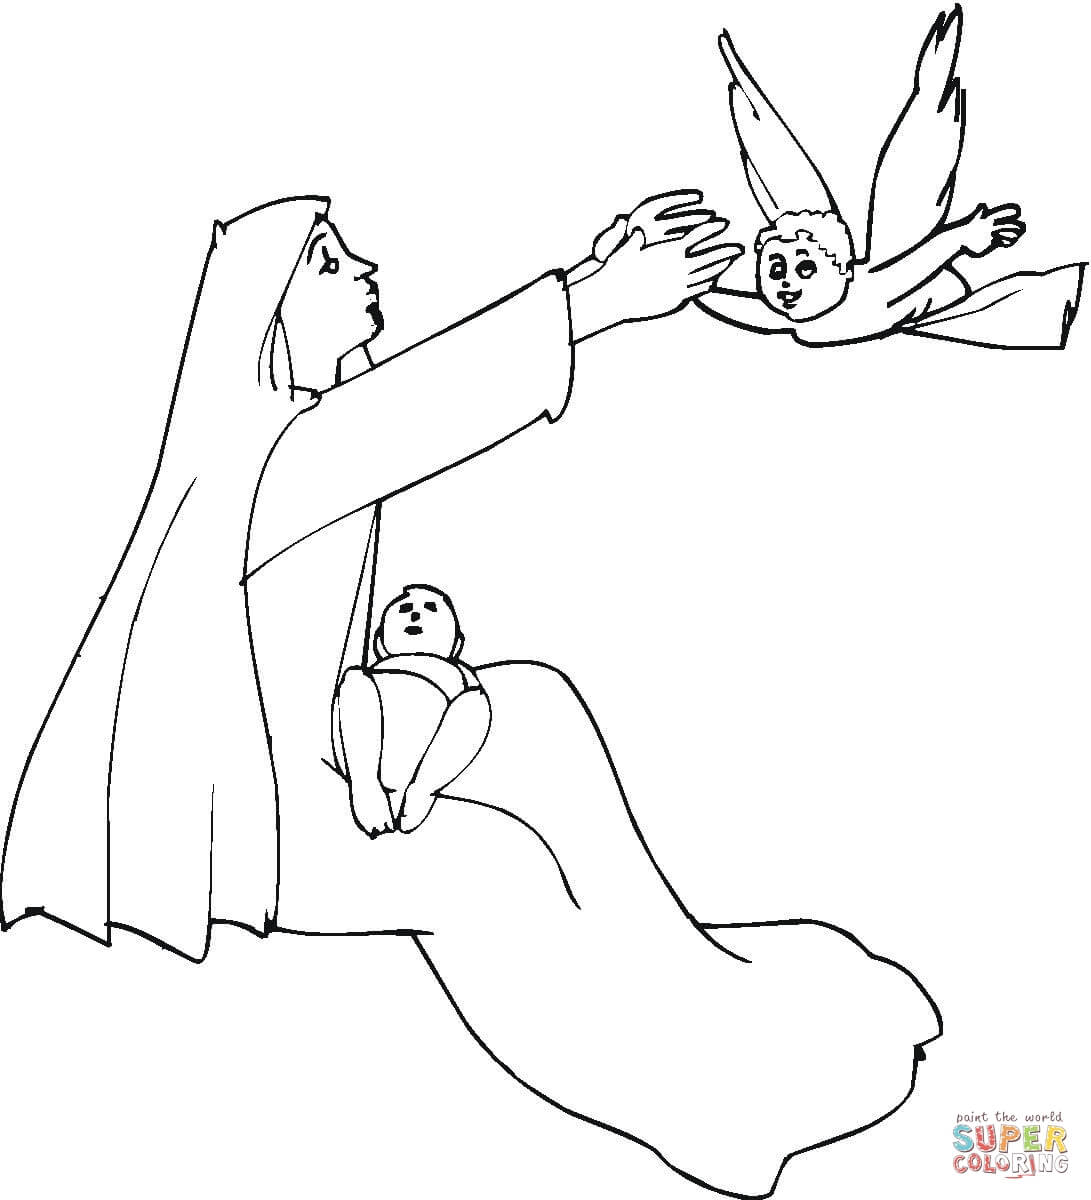 Angel Visits Mary coloring page | Free Printable Coloring Pages